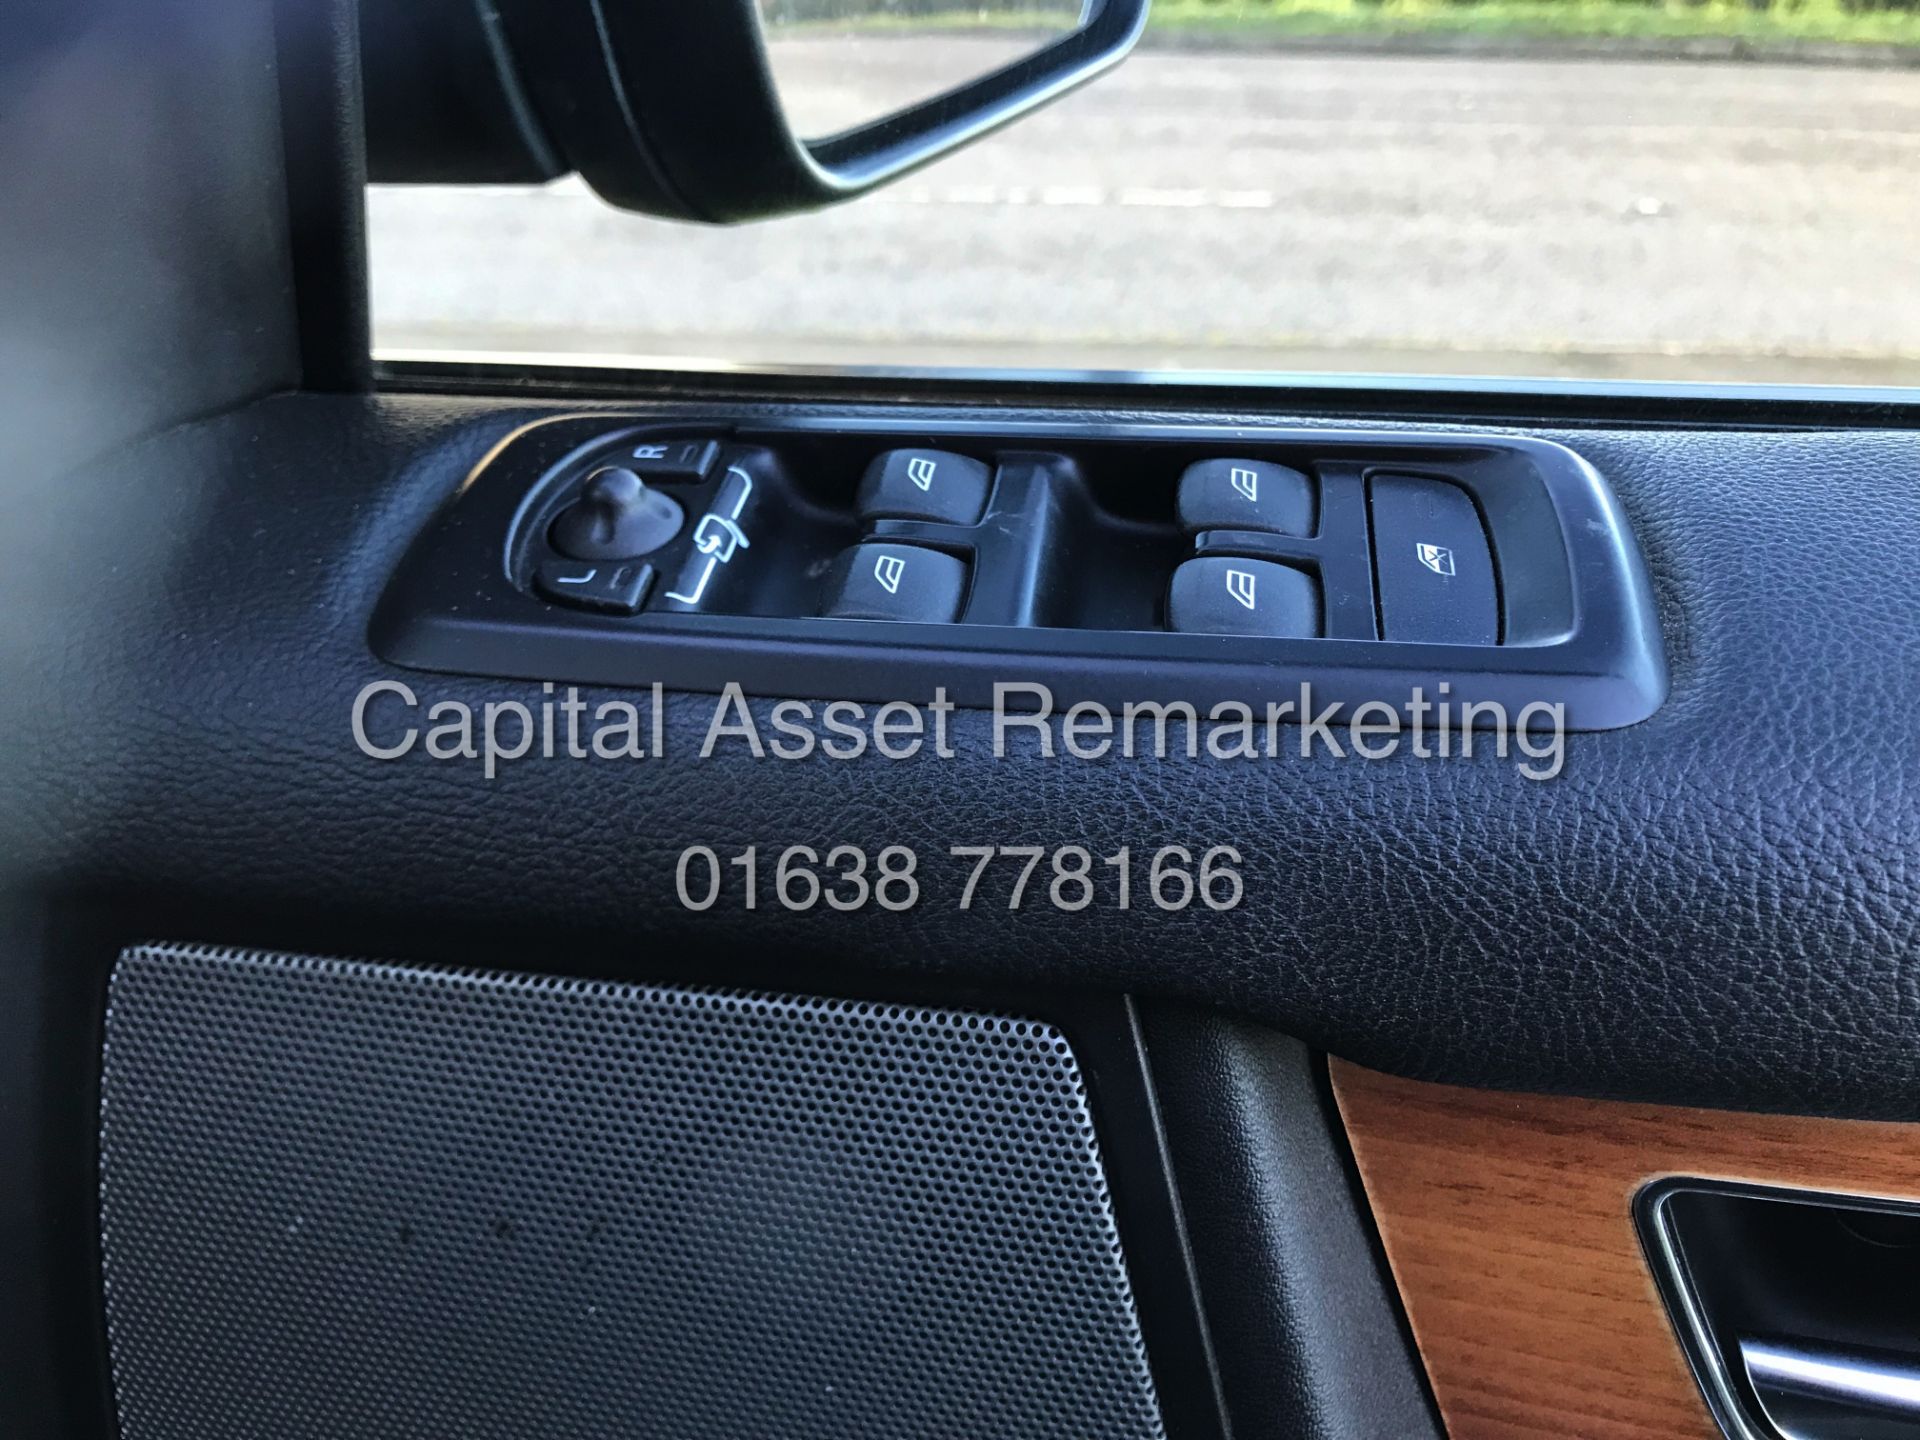 LAND ROVER DISCOVERY 4 "HSE" 3.0 SDV6 AUTOMATIC (13 REG) 7 SEATER **TOP OF THE RANGE** FULLY LOADED - Image 21 of 31